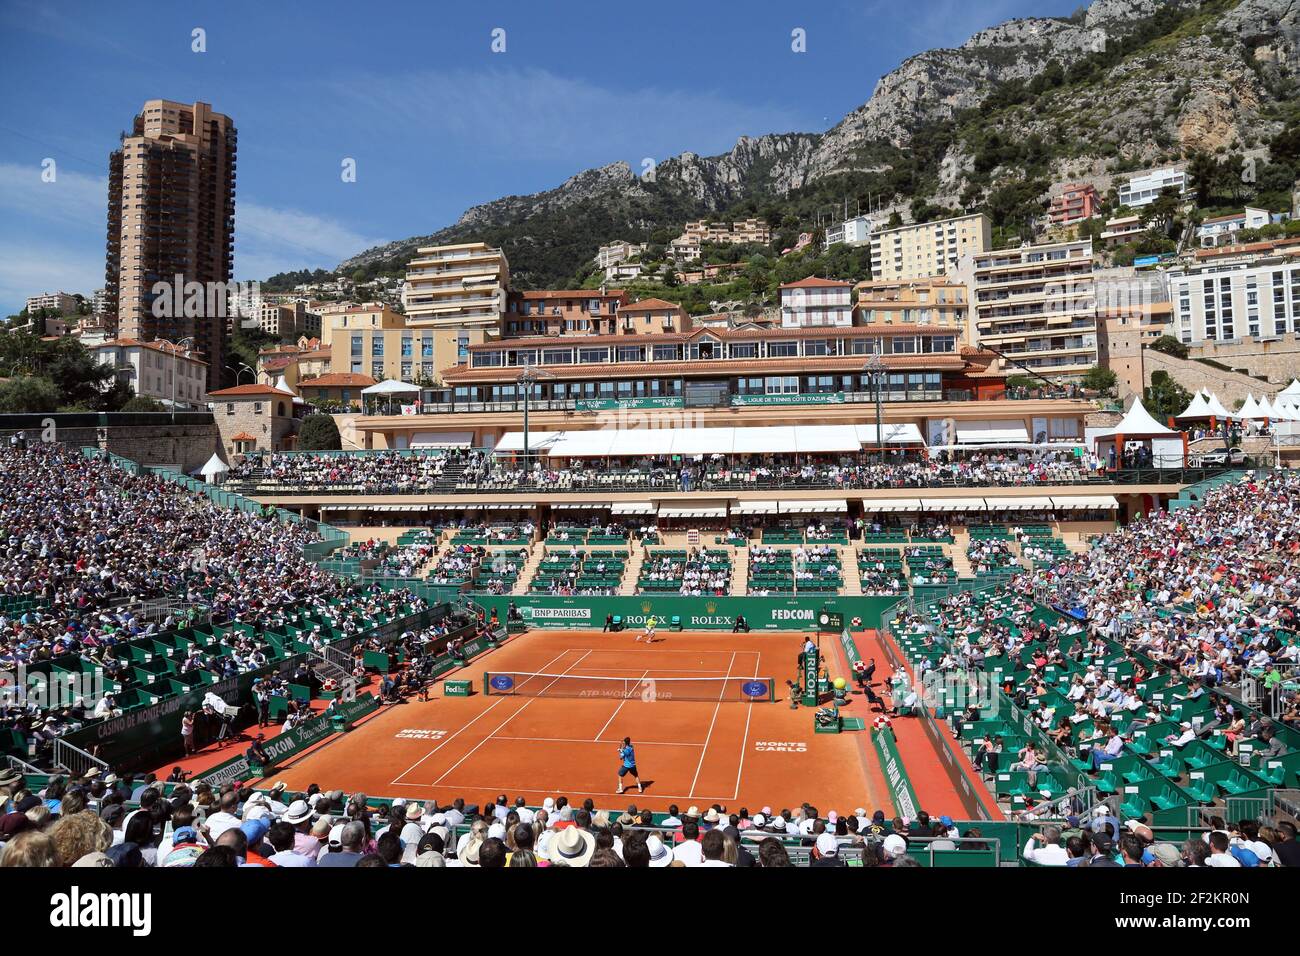 A general view of the central court at the Monte Carlo Country Club during  The ATP